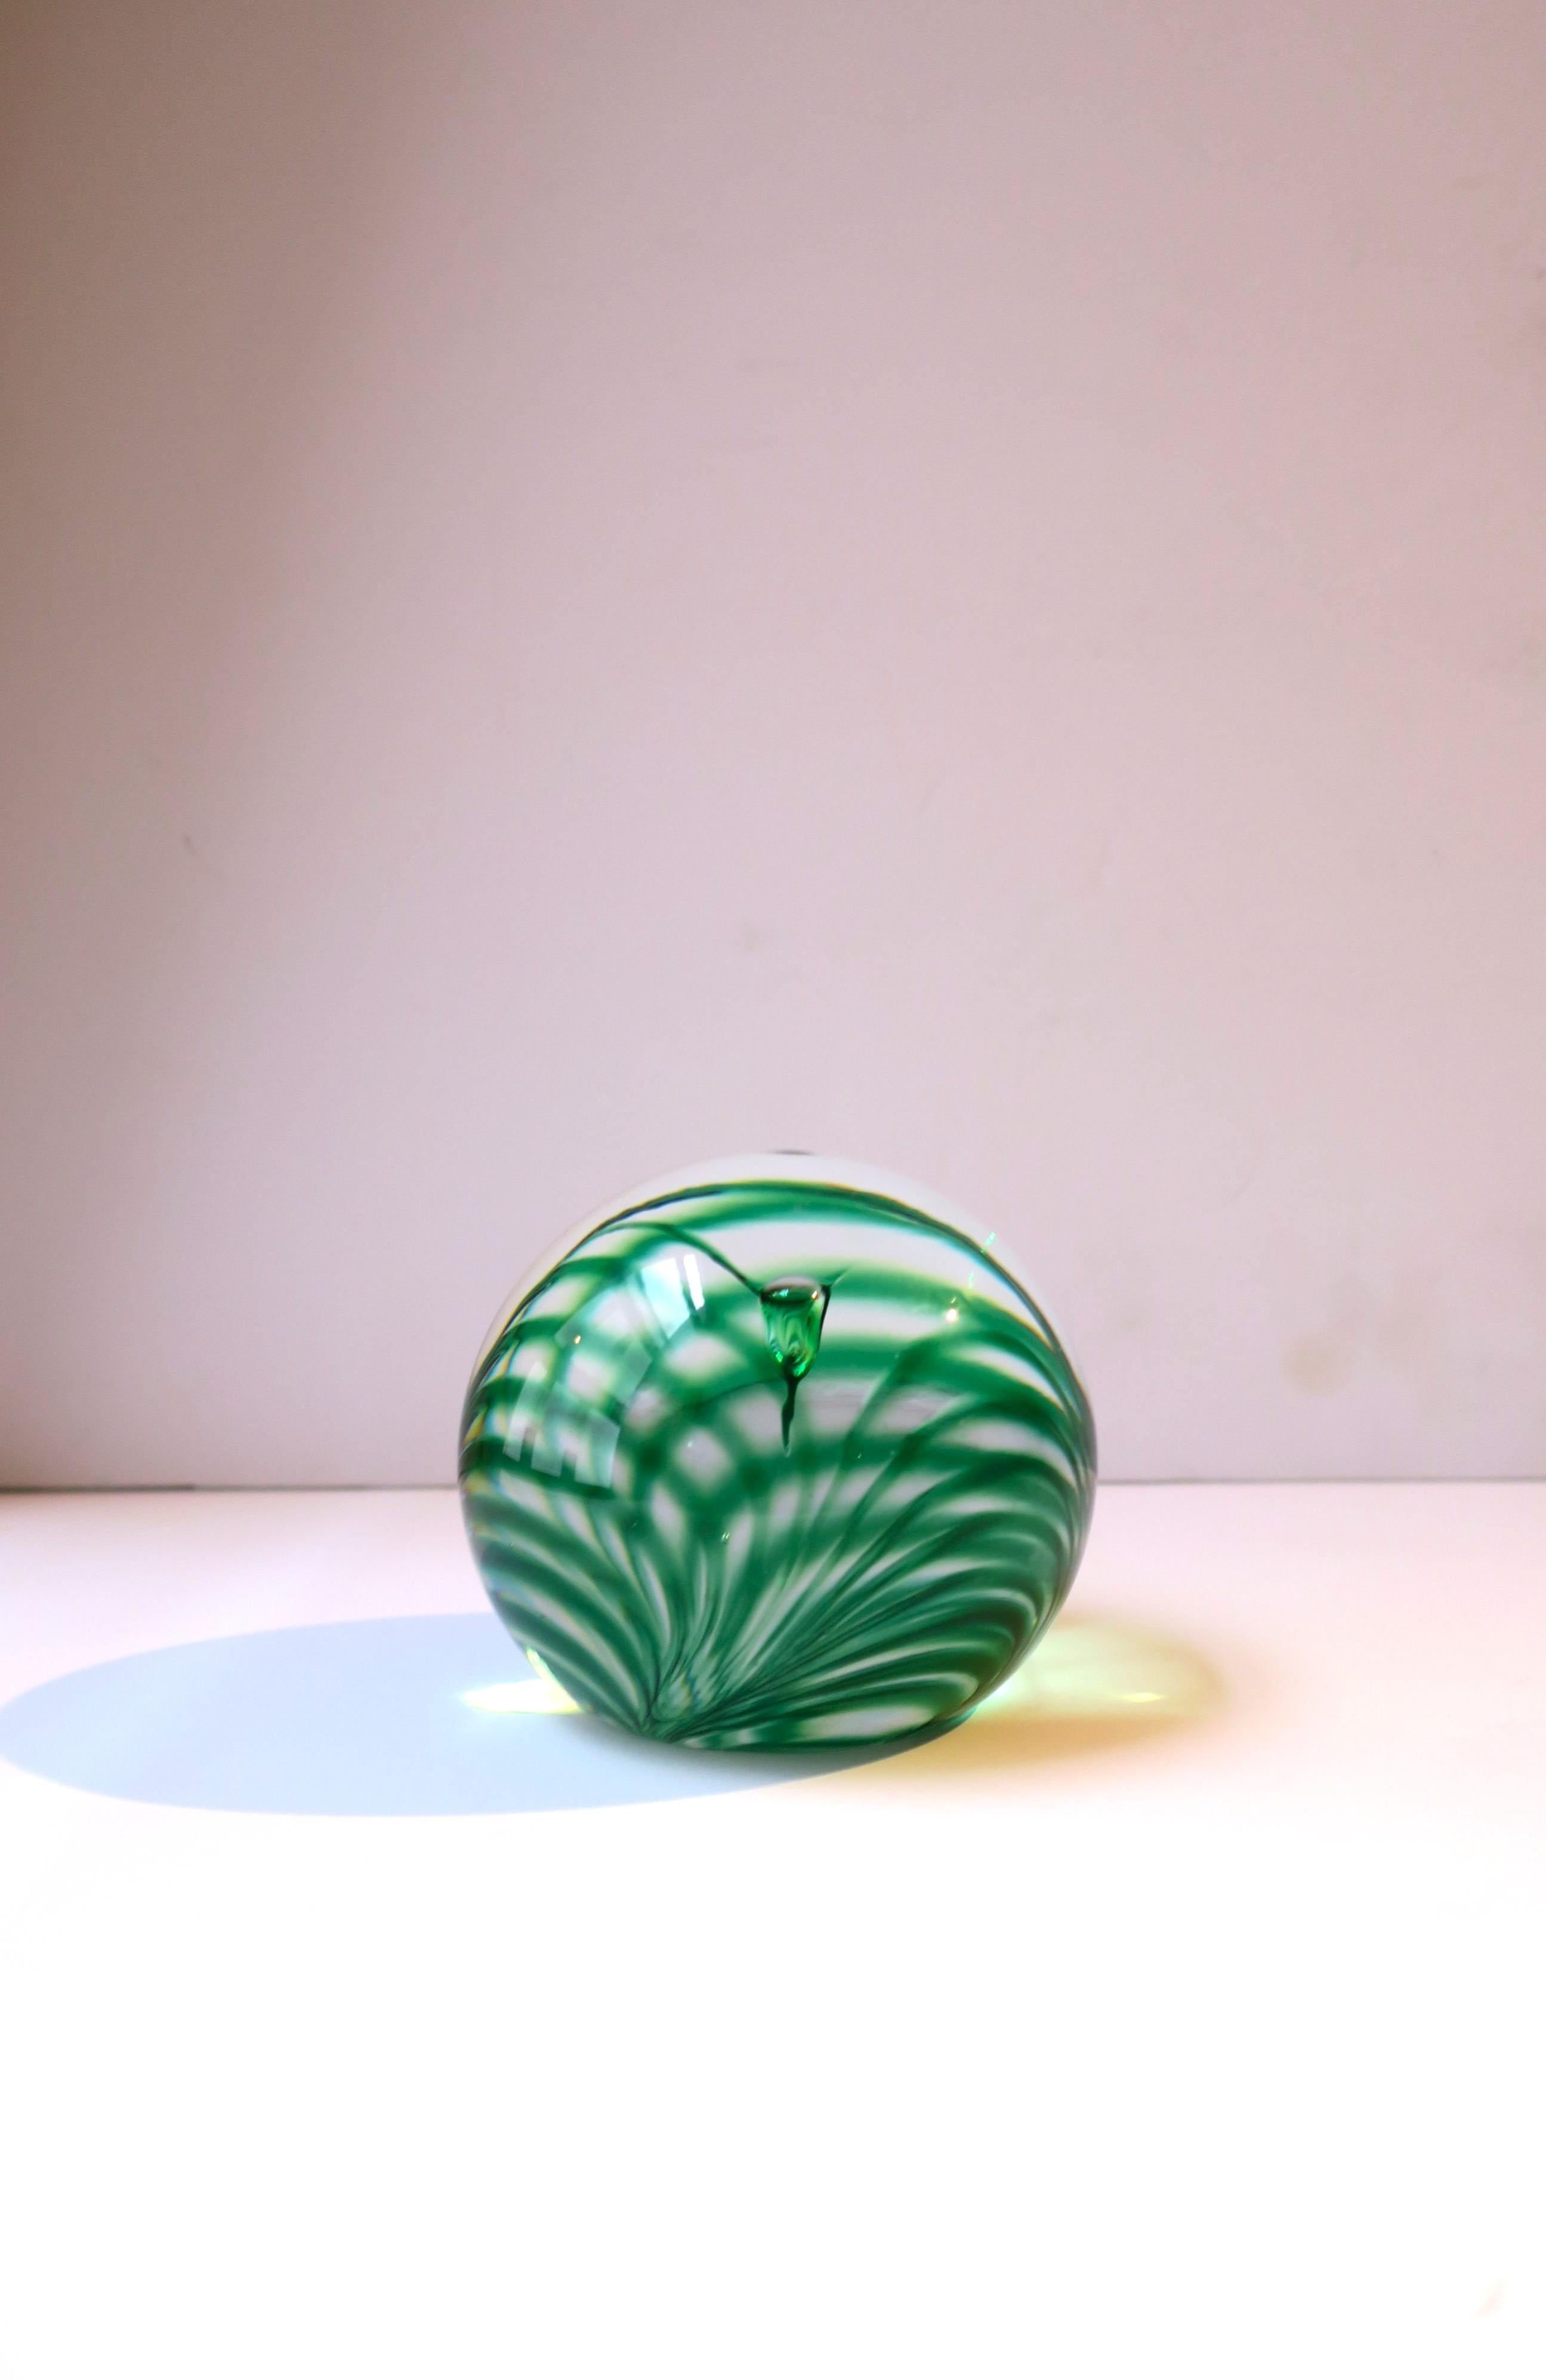 A beautiful Emerald green art glass ball sphere, in the modern style, with a tropical grass or palm-like design, circa late-20th century. Piece is a nice size, a little bigger than the typical size, measuring 3.5